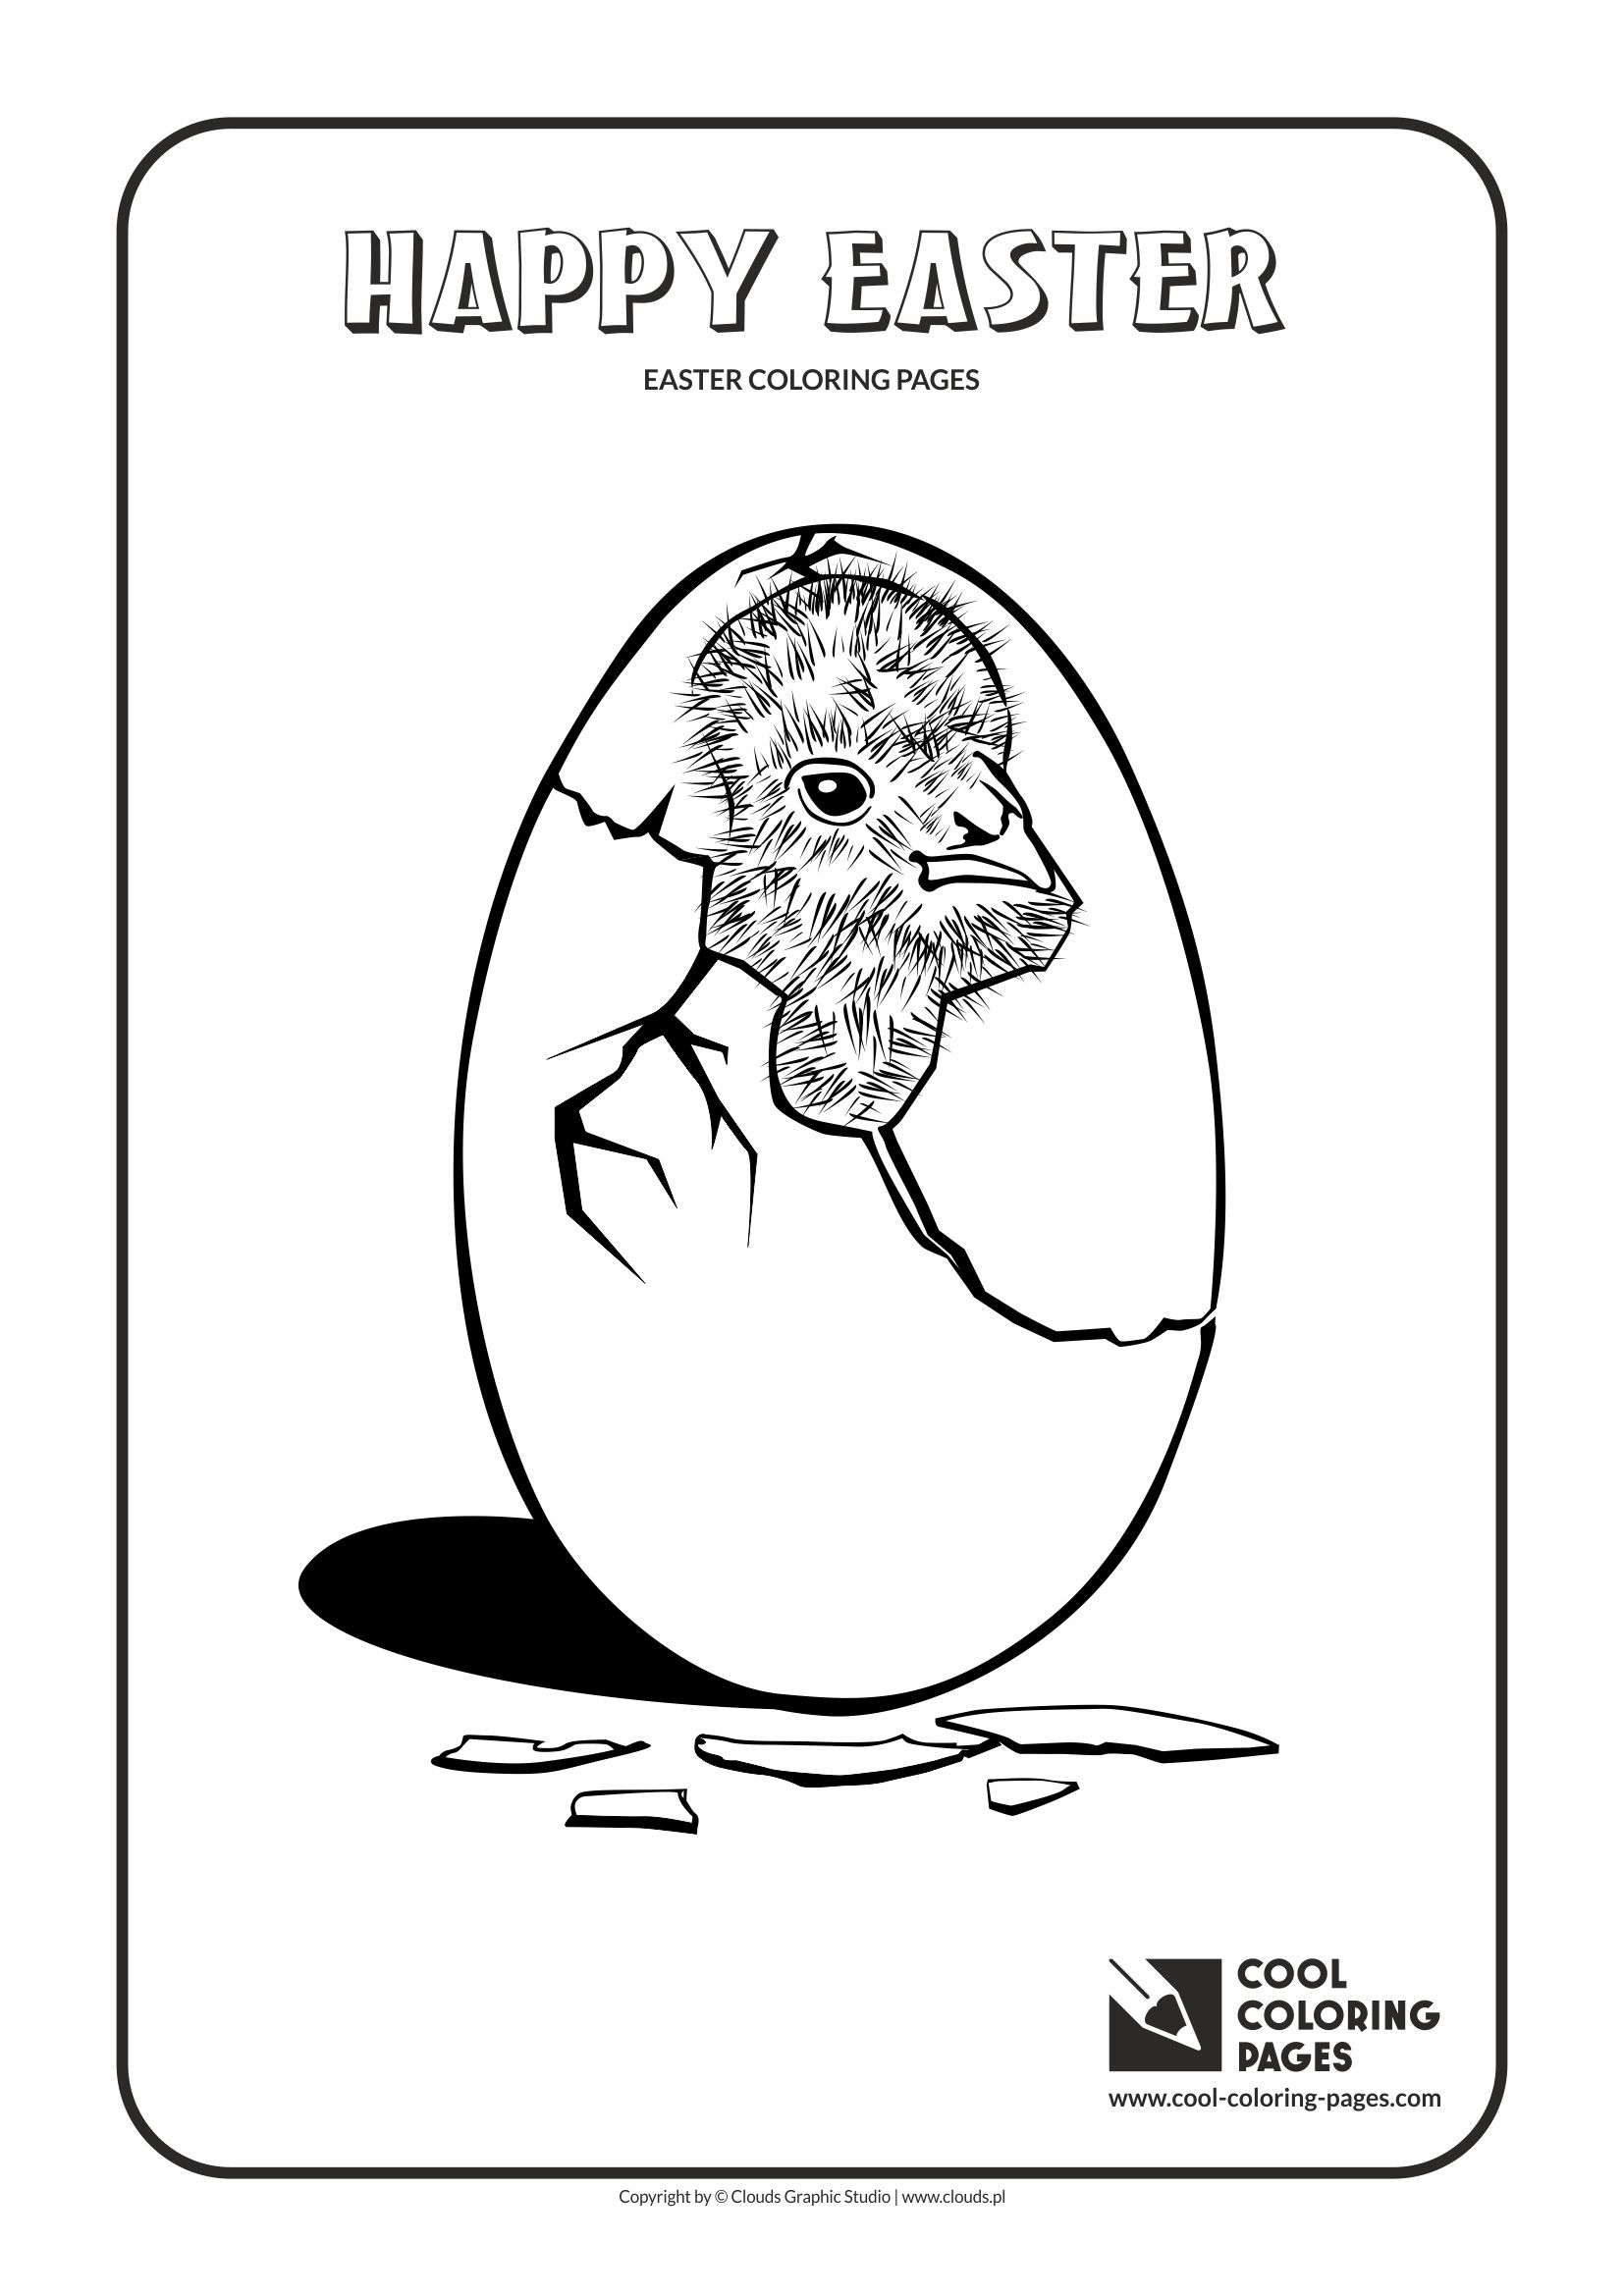 Cool Coloring Pages - Holidays / Easter chicken no 2 / Coloring page with Easter chicken no 2